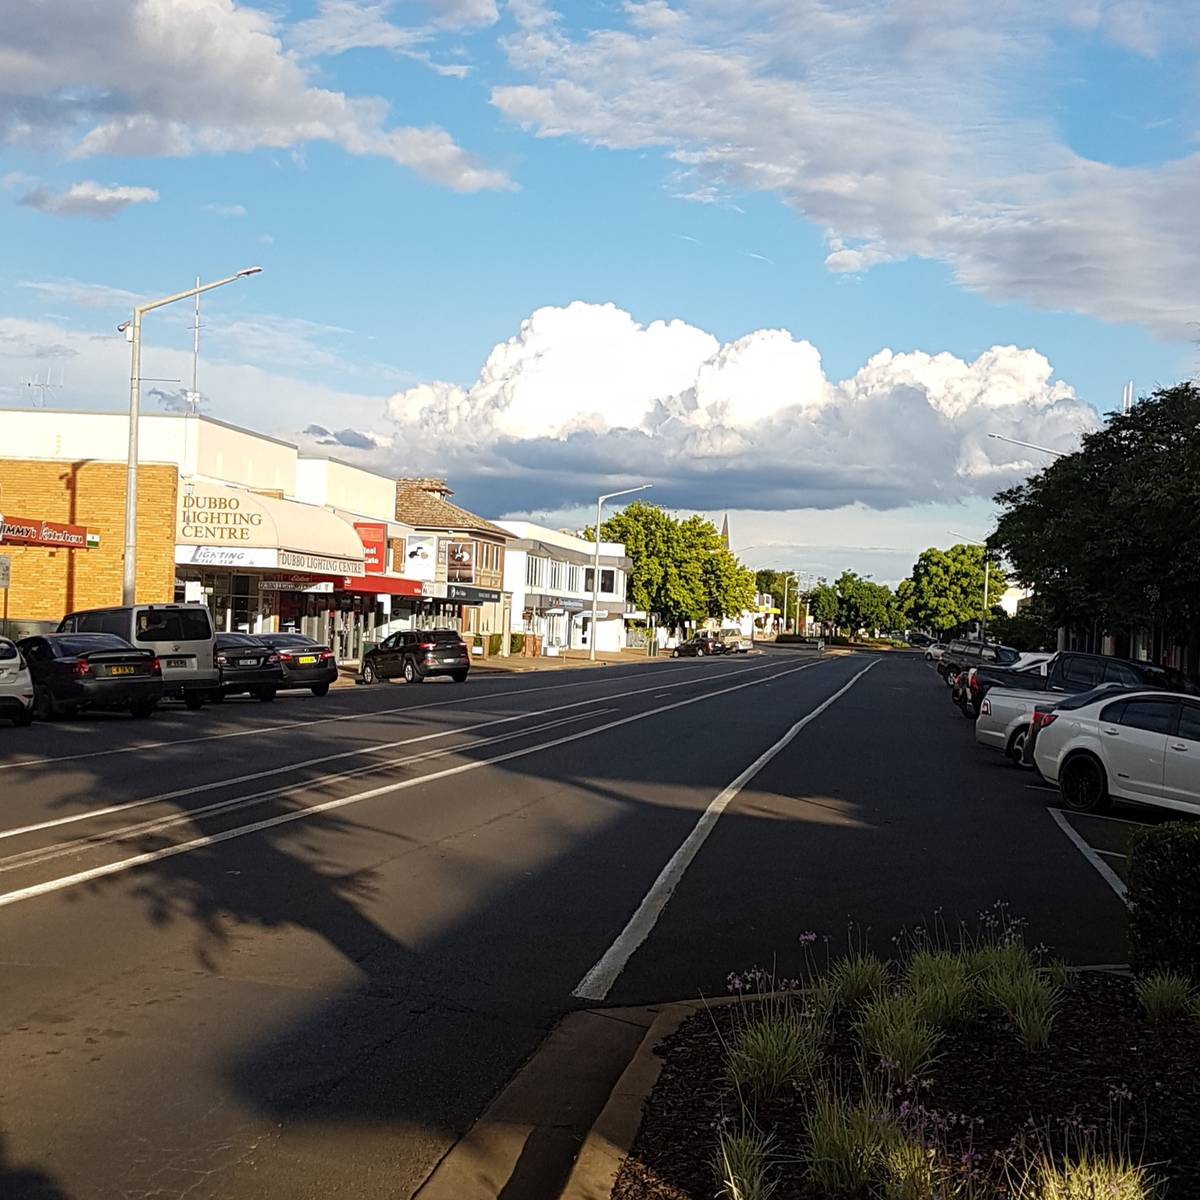 Dubbo is a pretty big country town. Neat and tidy, I just love the wide streets.